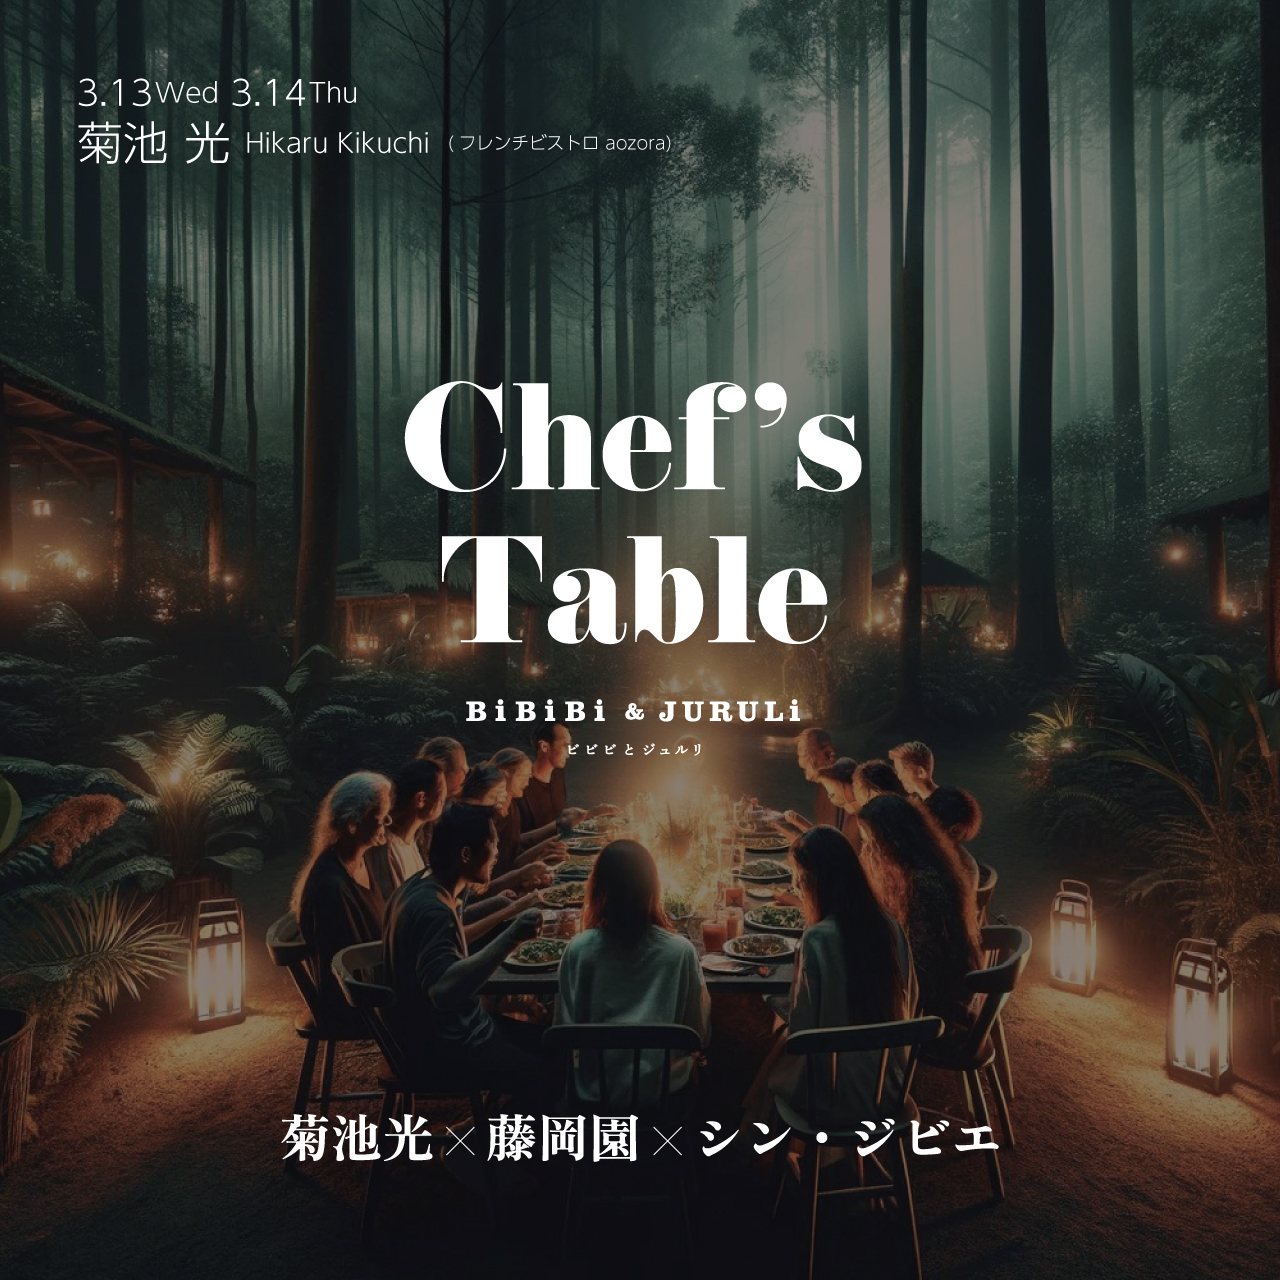 Chef’s Table -菊池光×藤岡園×シン・ジビエ-